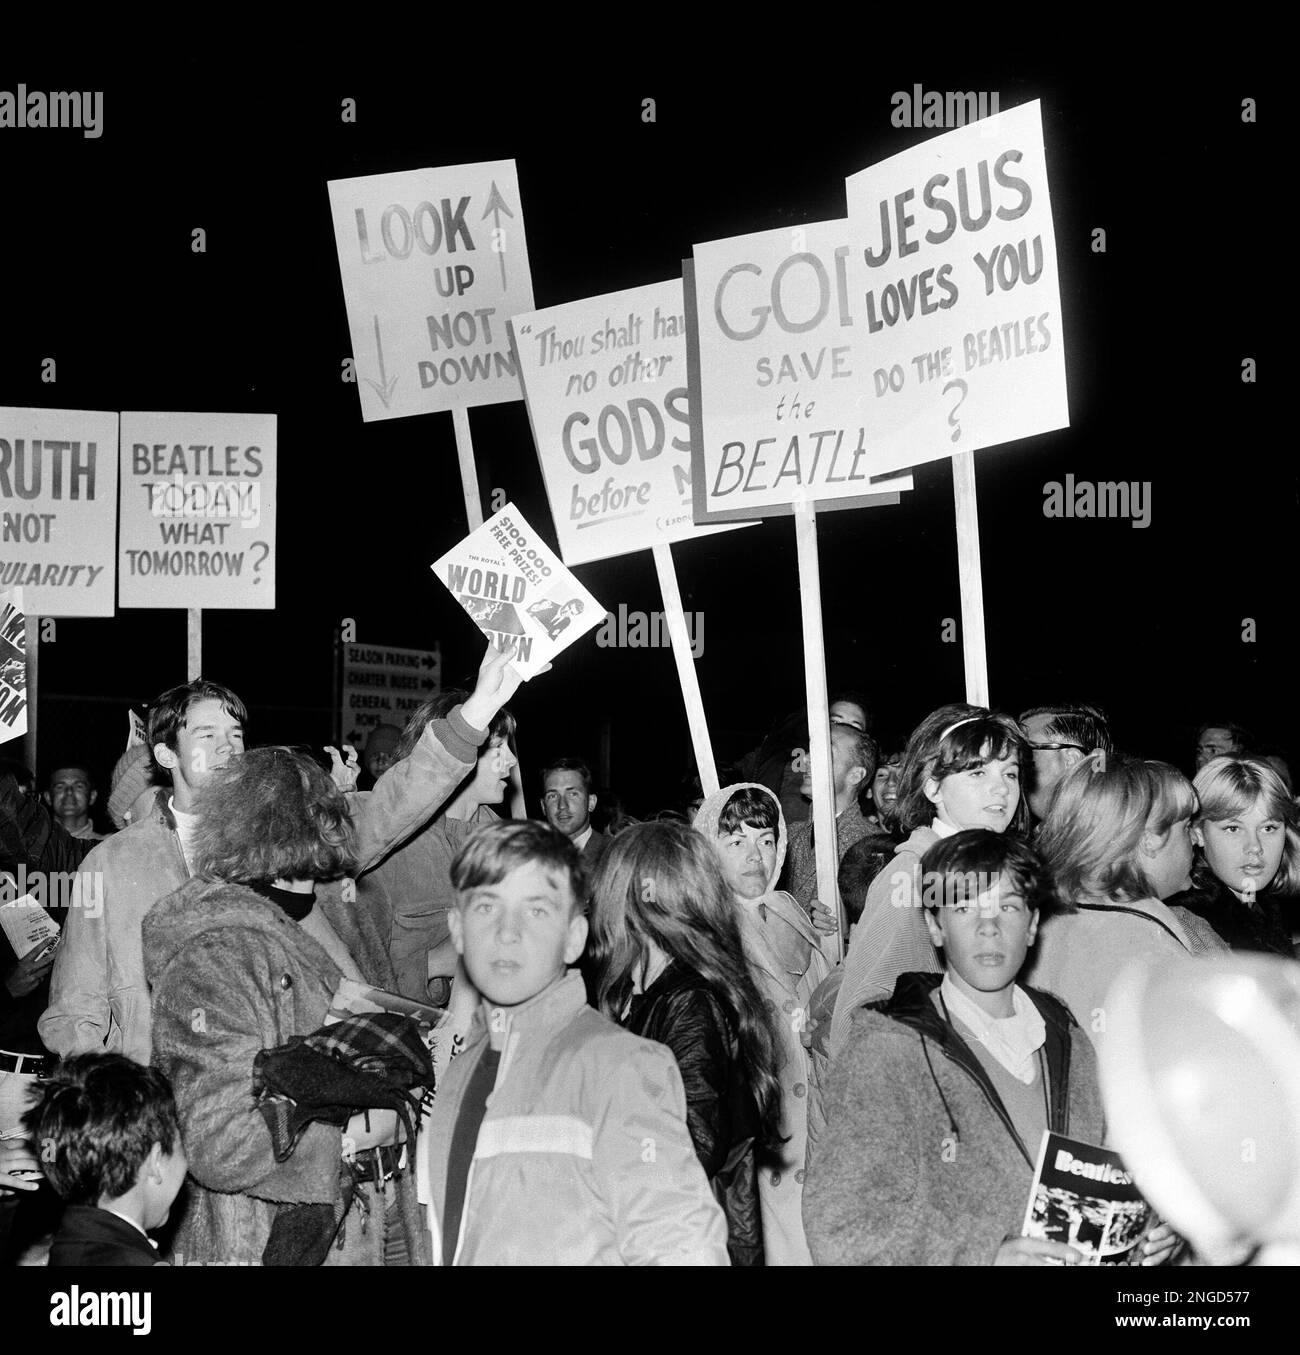 Young churchfolk from Sunnyvale on the San Francisco peninsula protest against the Beatles and John Lennon's remark that The Beatles are "more popular than Jesus" outside Candlestick Park where the Beatles are holding a concert in San Francisco, Ca., Aug. 29, 1966. The picketers were seen by many of the teenagers but missed by the entertainers, who arrived and departed from a different direction. Some 25,000 fans went through the gates for The Beatles' final U.S. performance on their tour. (AP Photo) Stock Photo